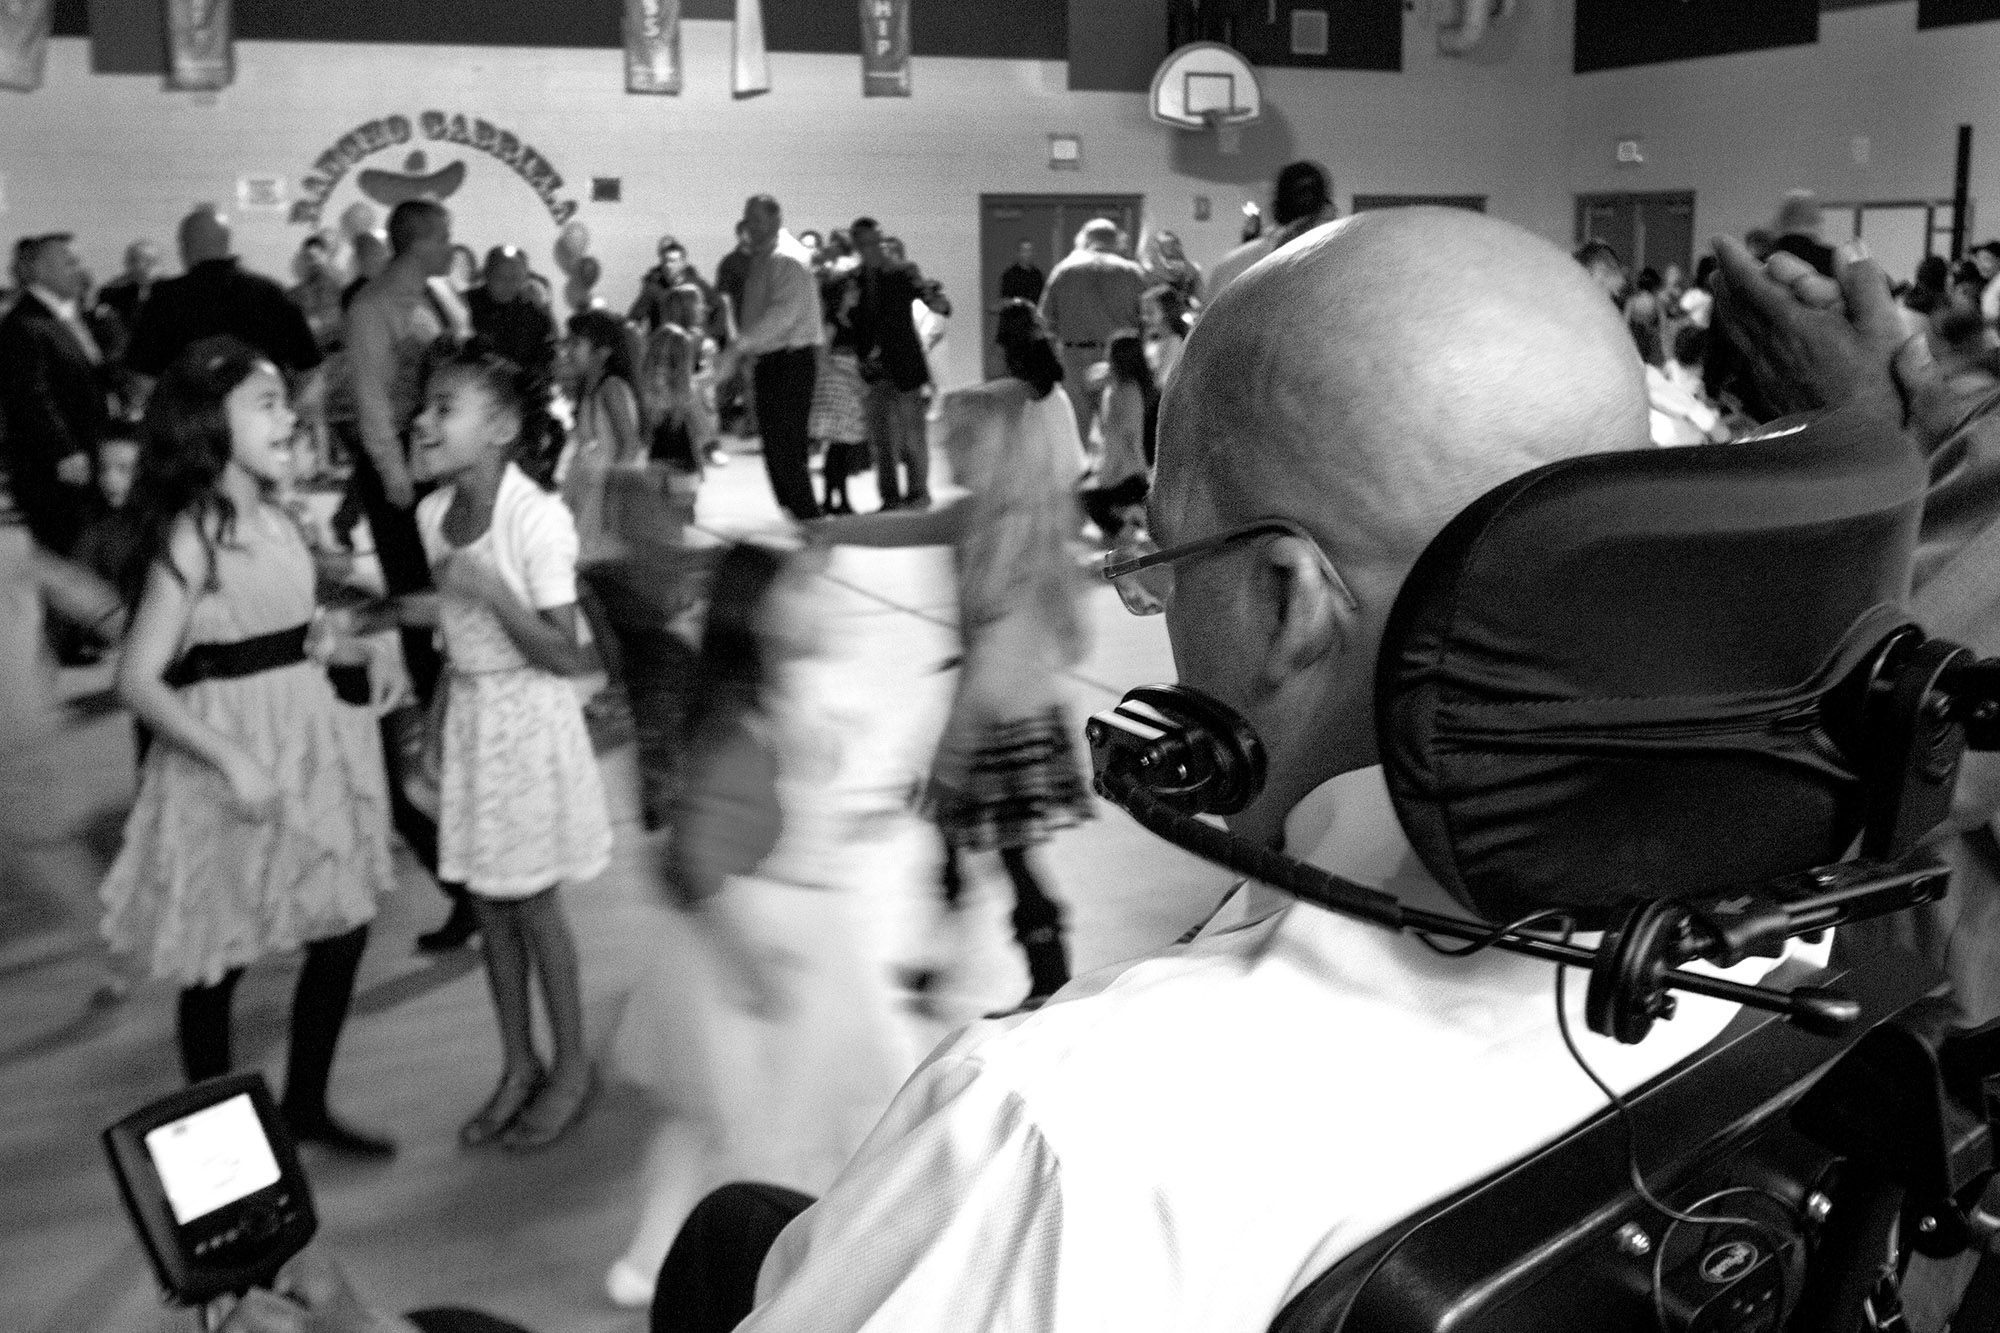  Mike watches his daughter Miah (left)&nbsp;laugh with her friend during a father-daughter dance in her school's gymnasium. 